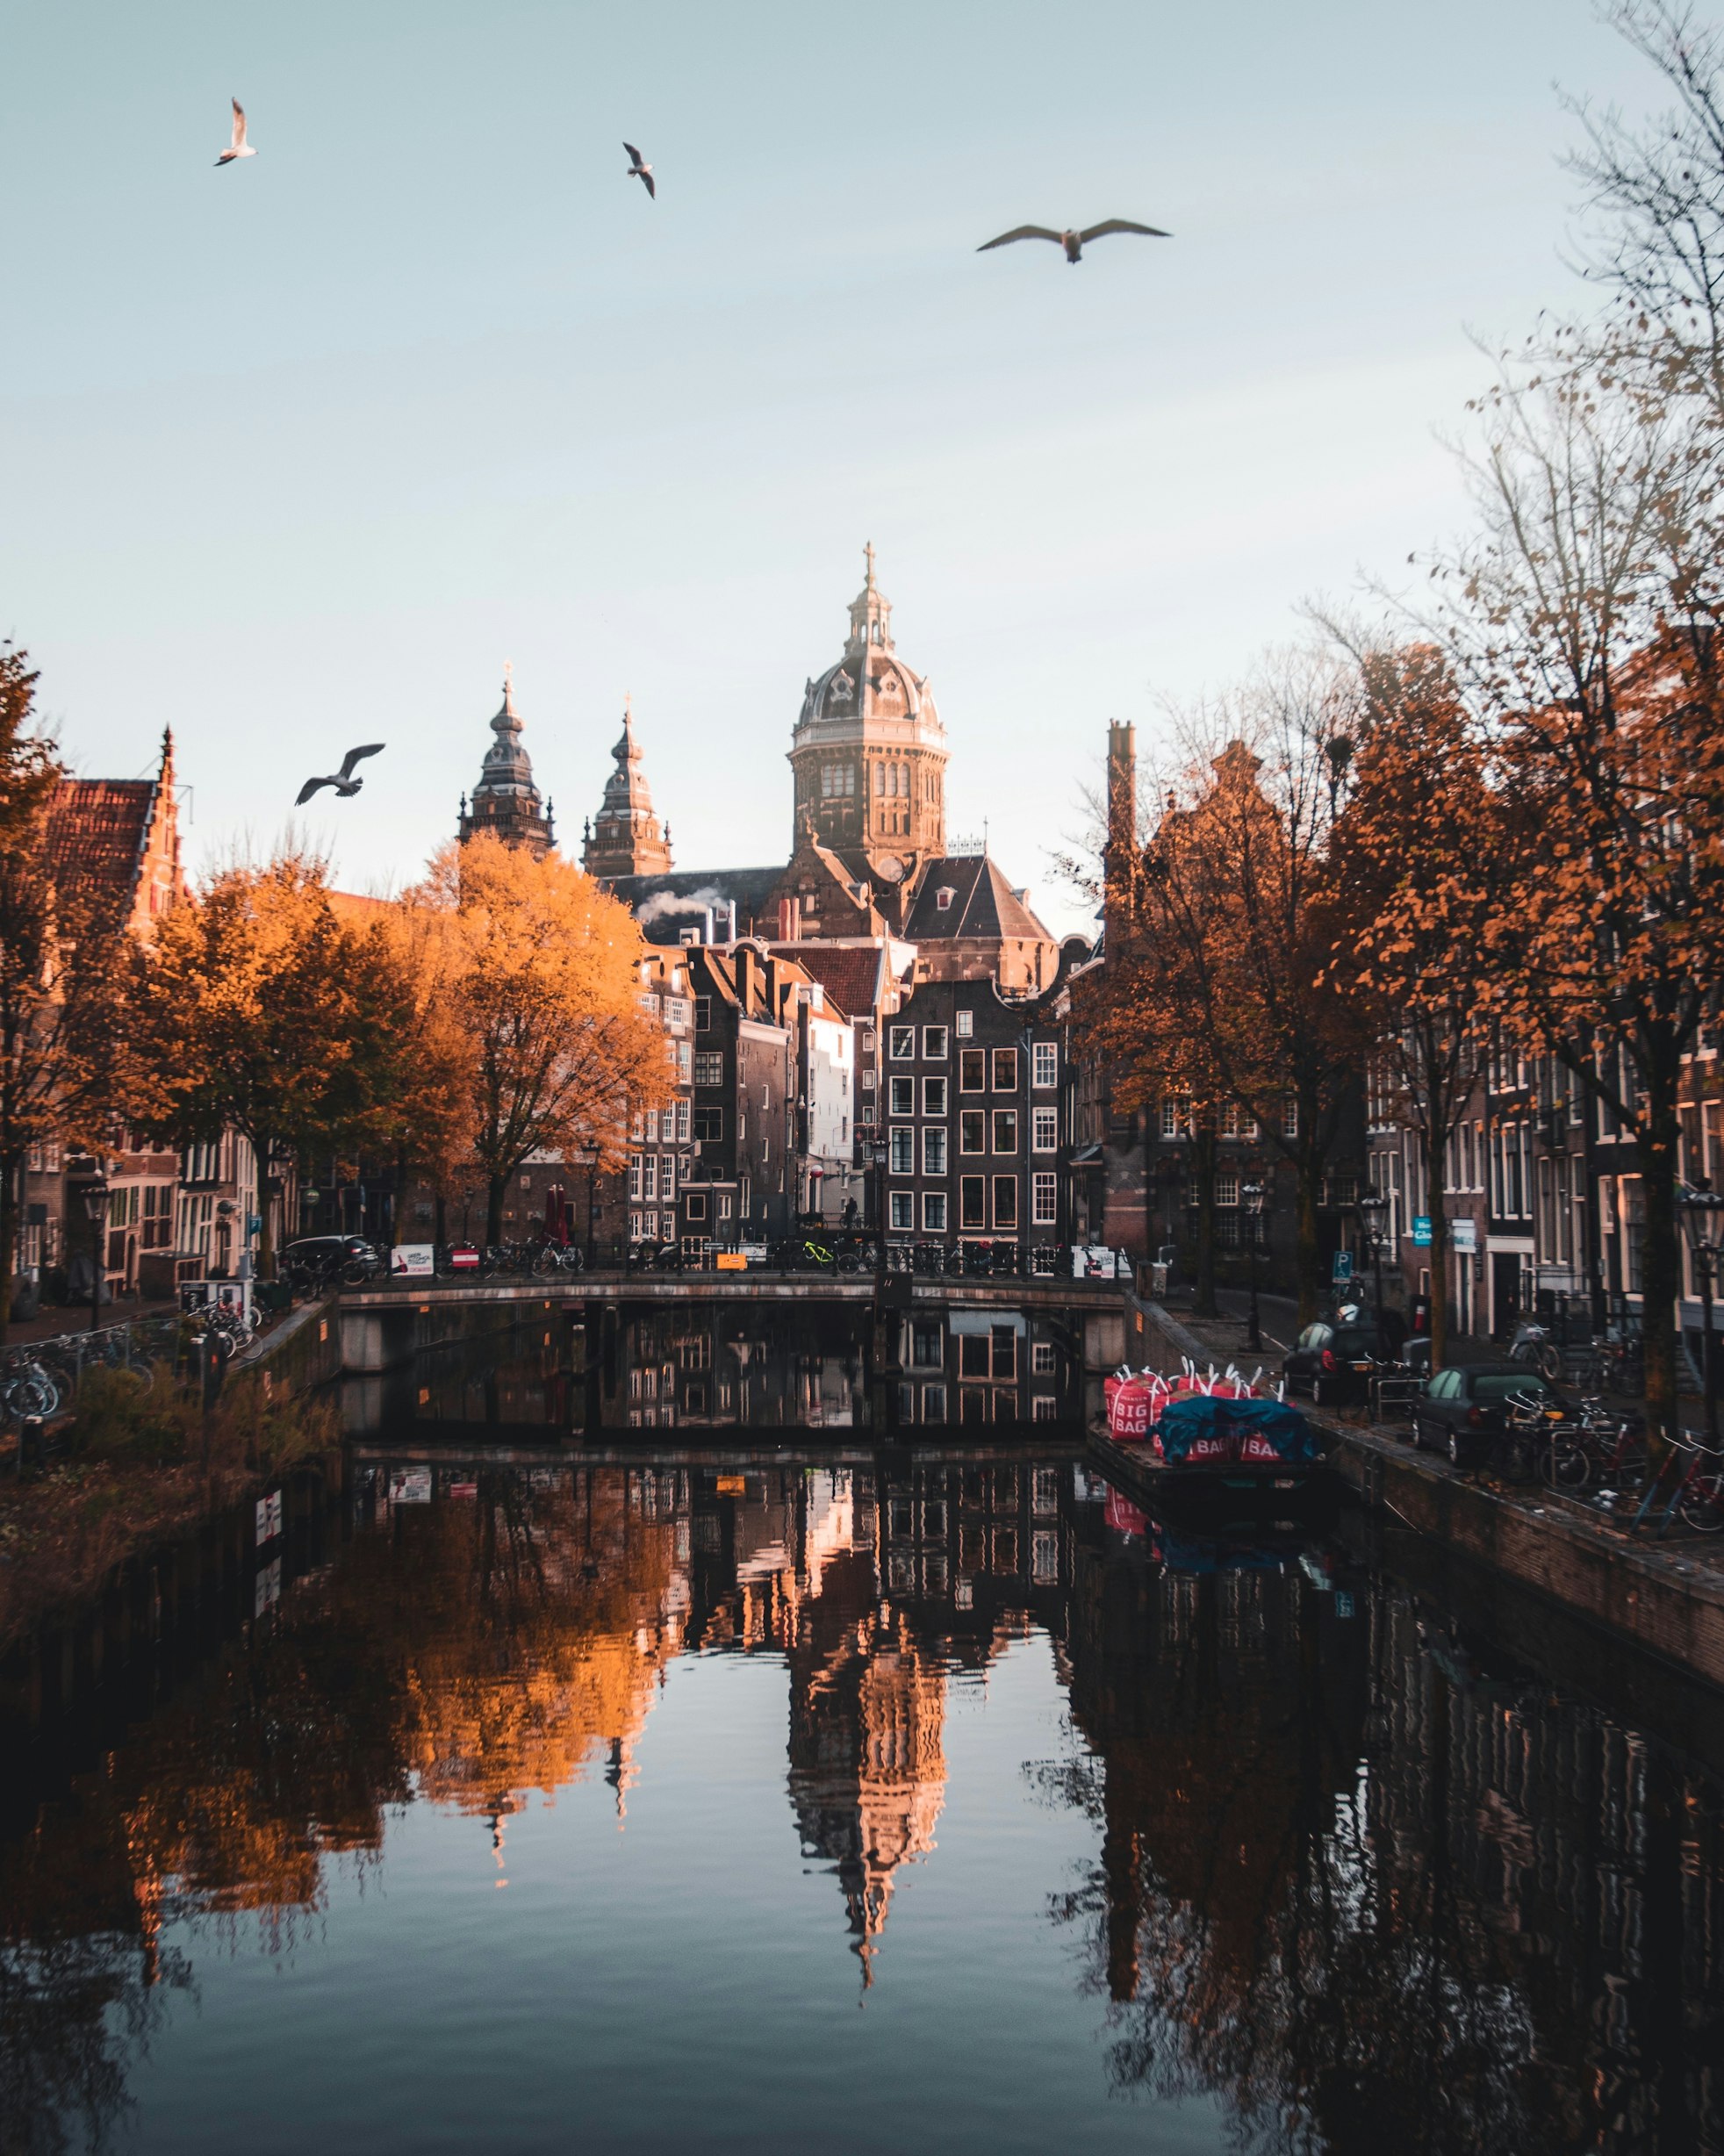 Lose yourself in the Amsterdam canals with beautiful shortwalks.